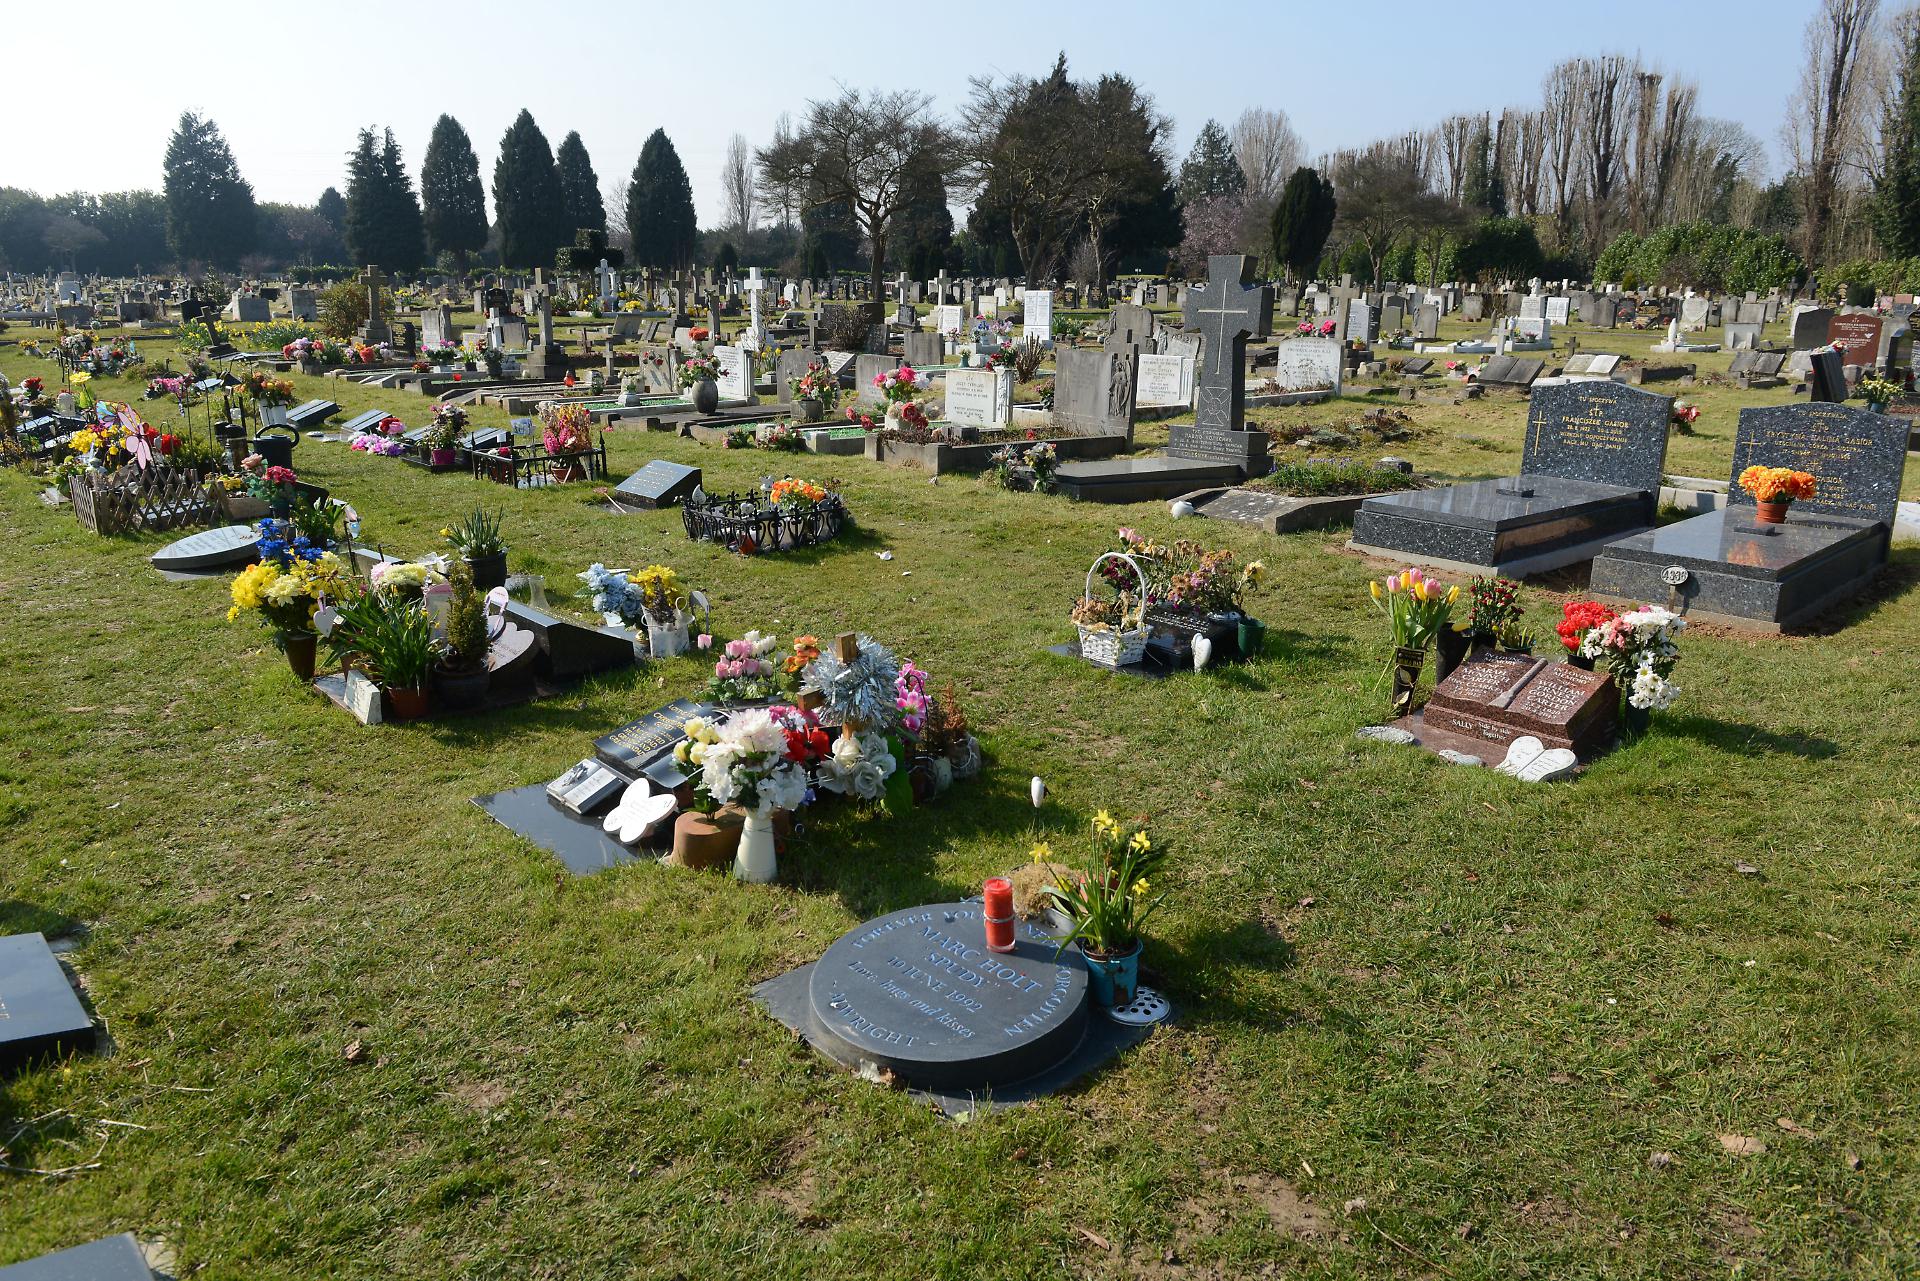 A view of the cemetery